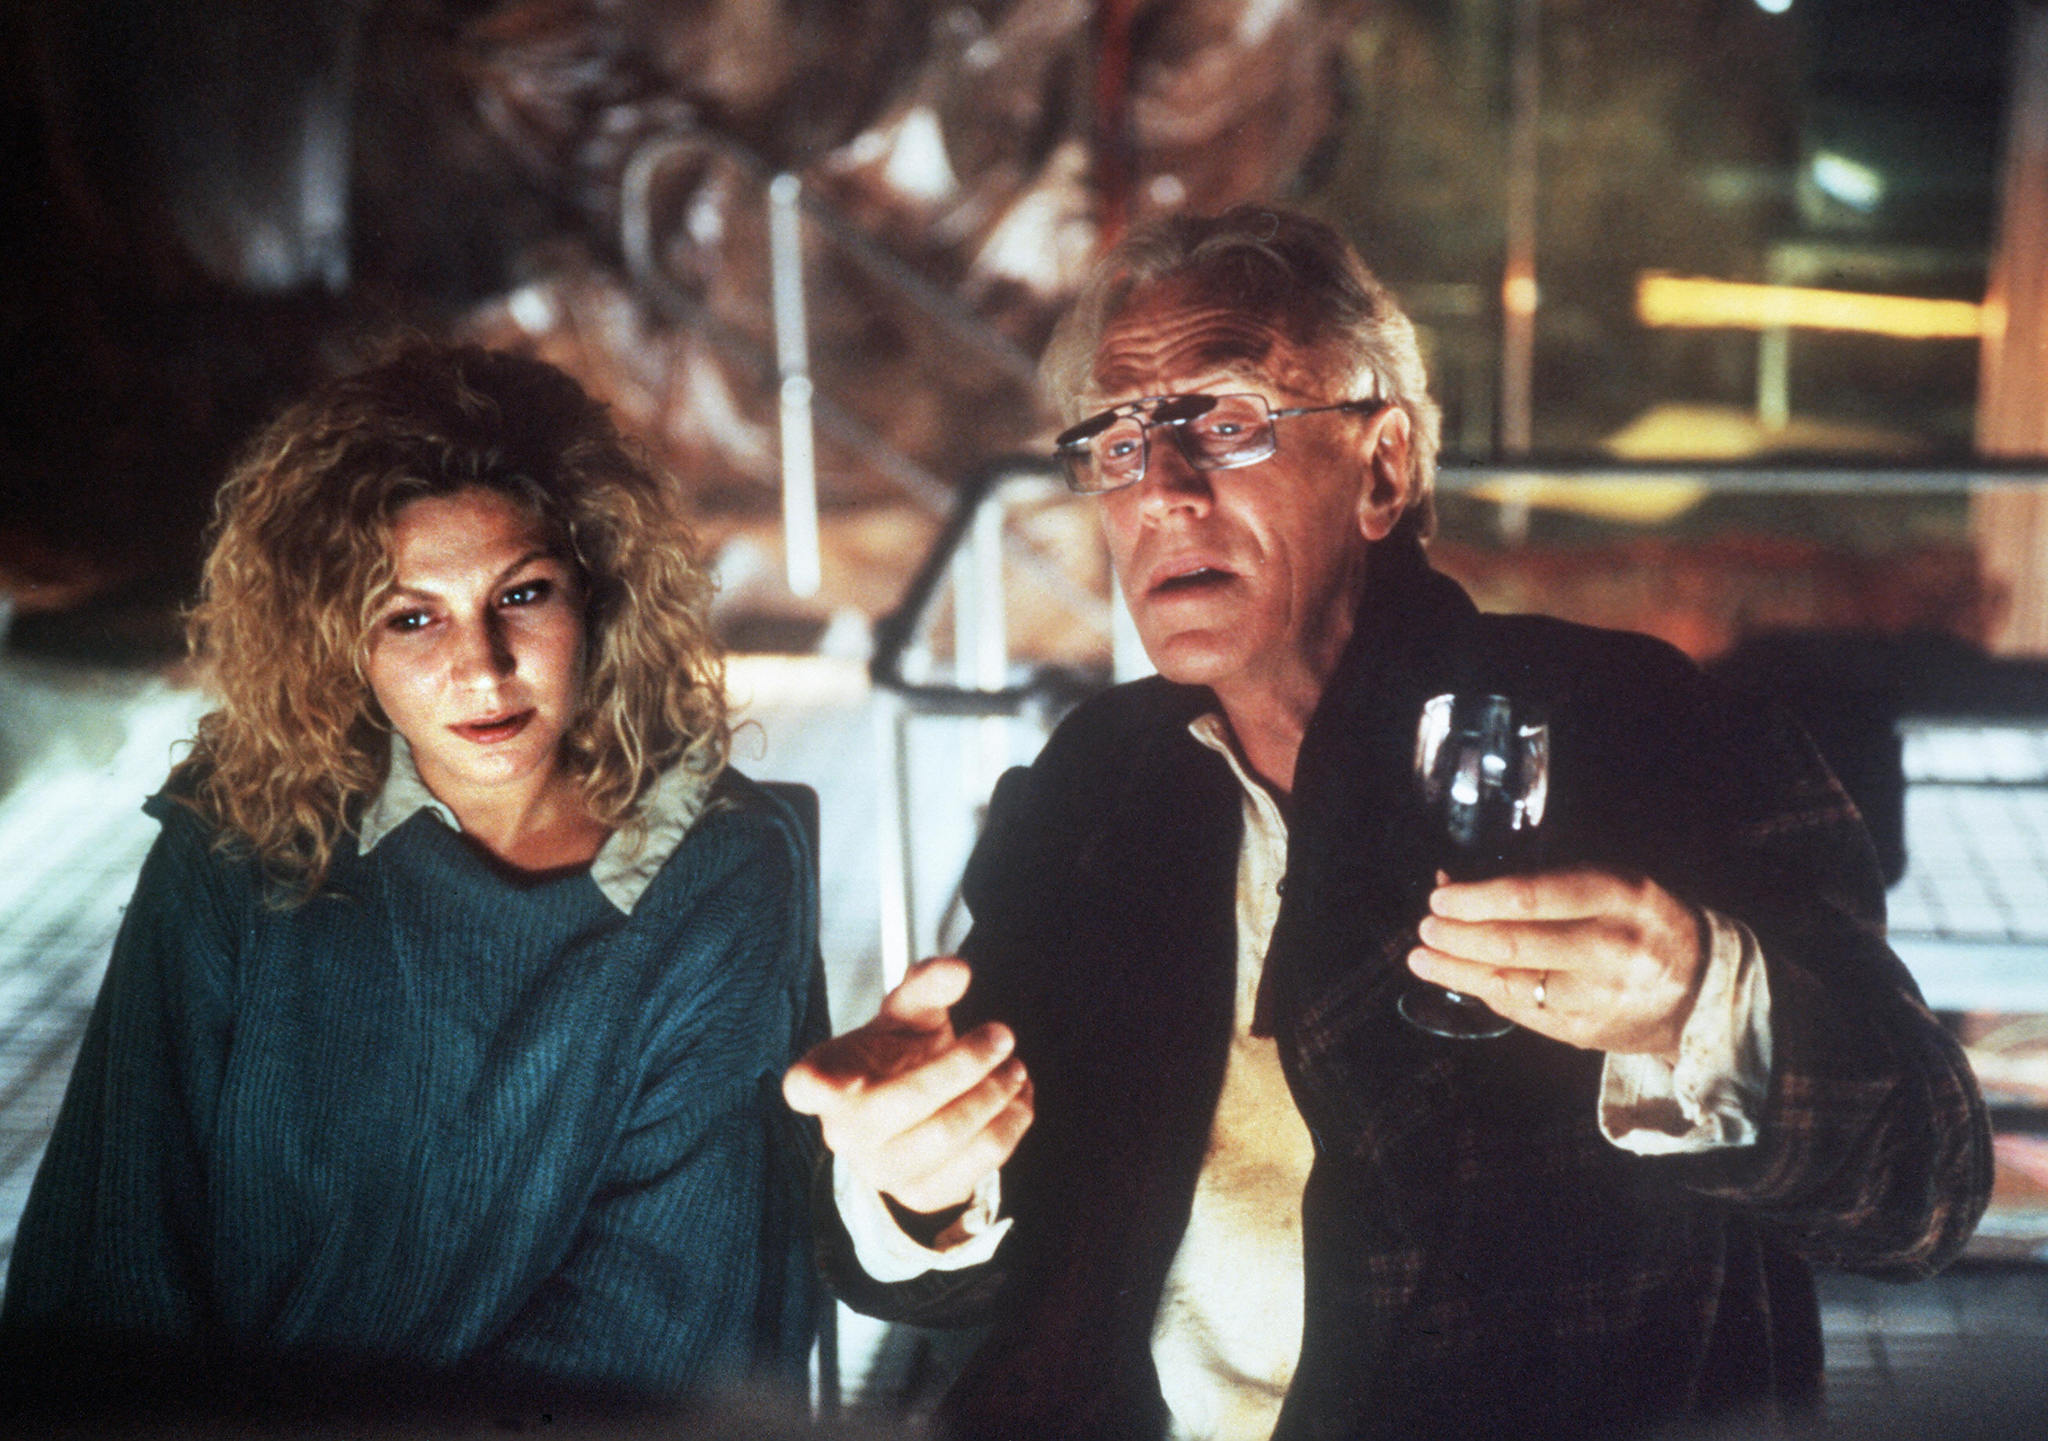 Until the End of the World (1991) Screenshot 1 